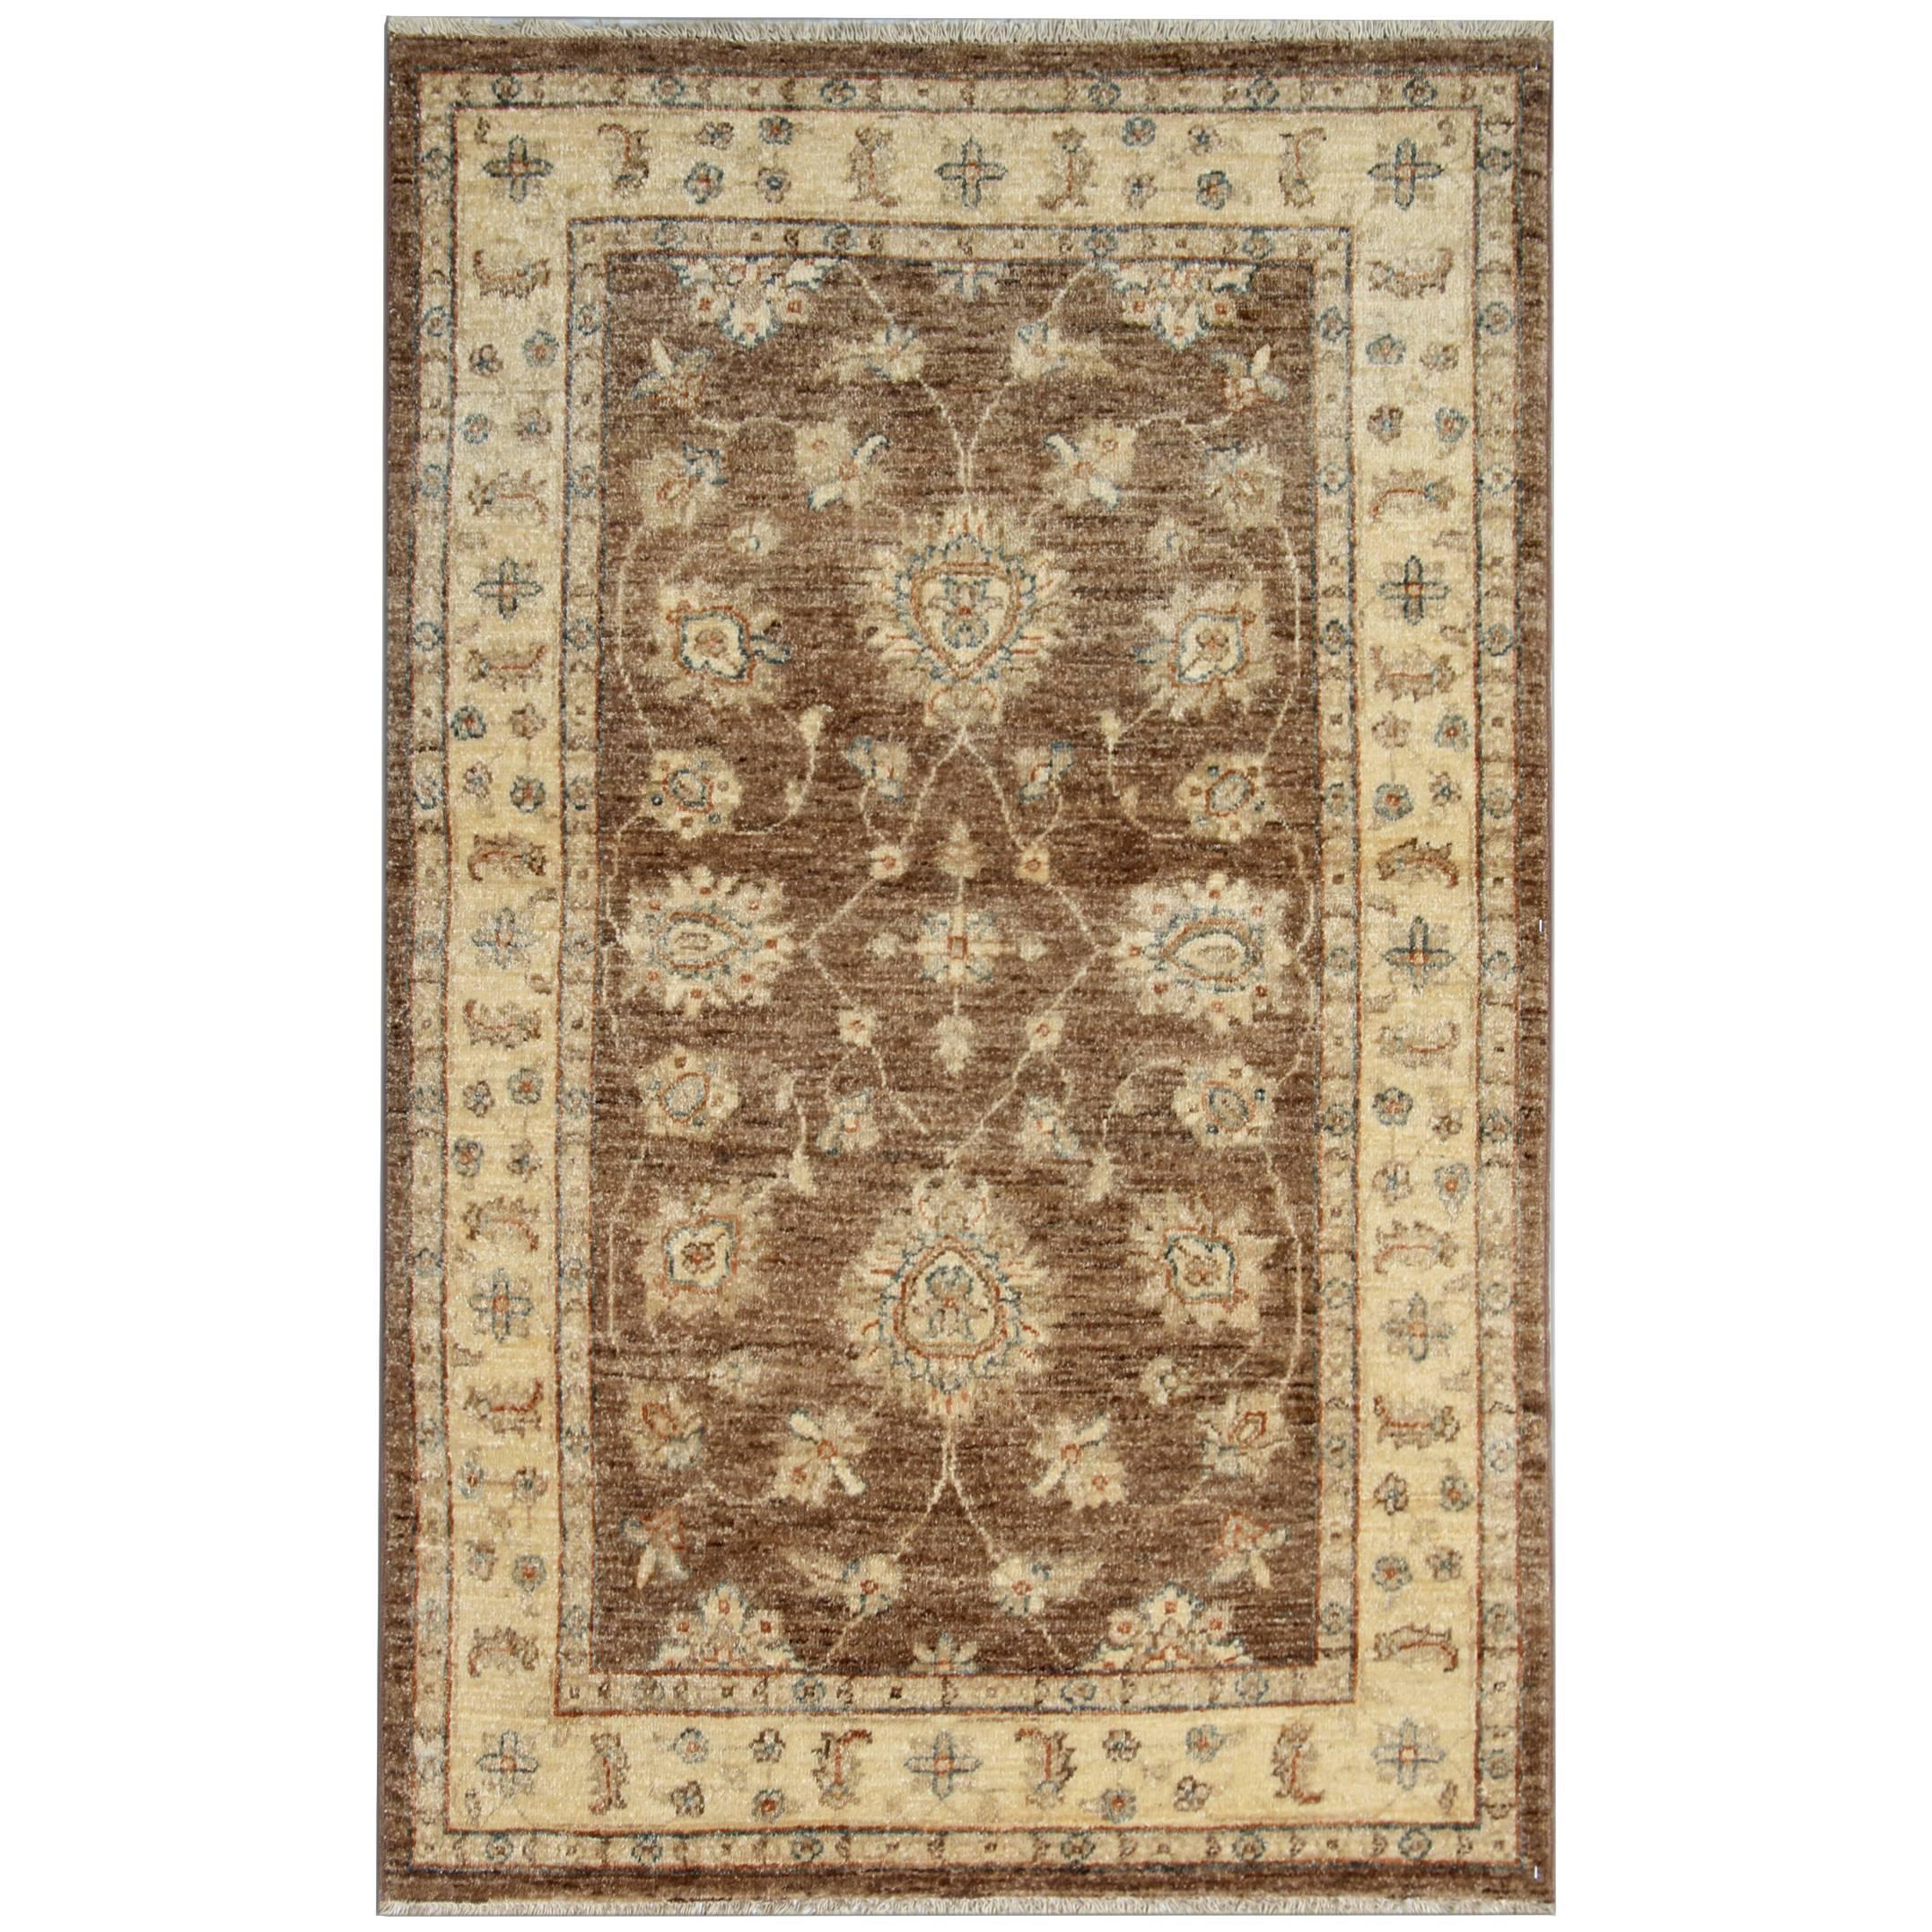 Brown Rug Hand Made Carpet Living room Rugs, with Oriental Rugs Design